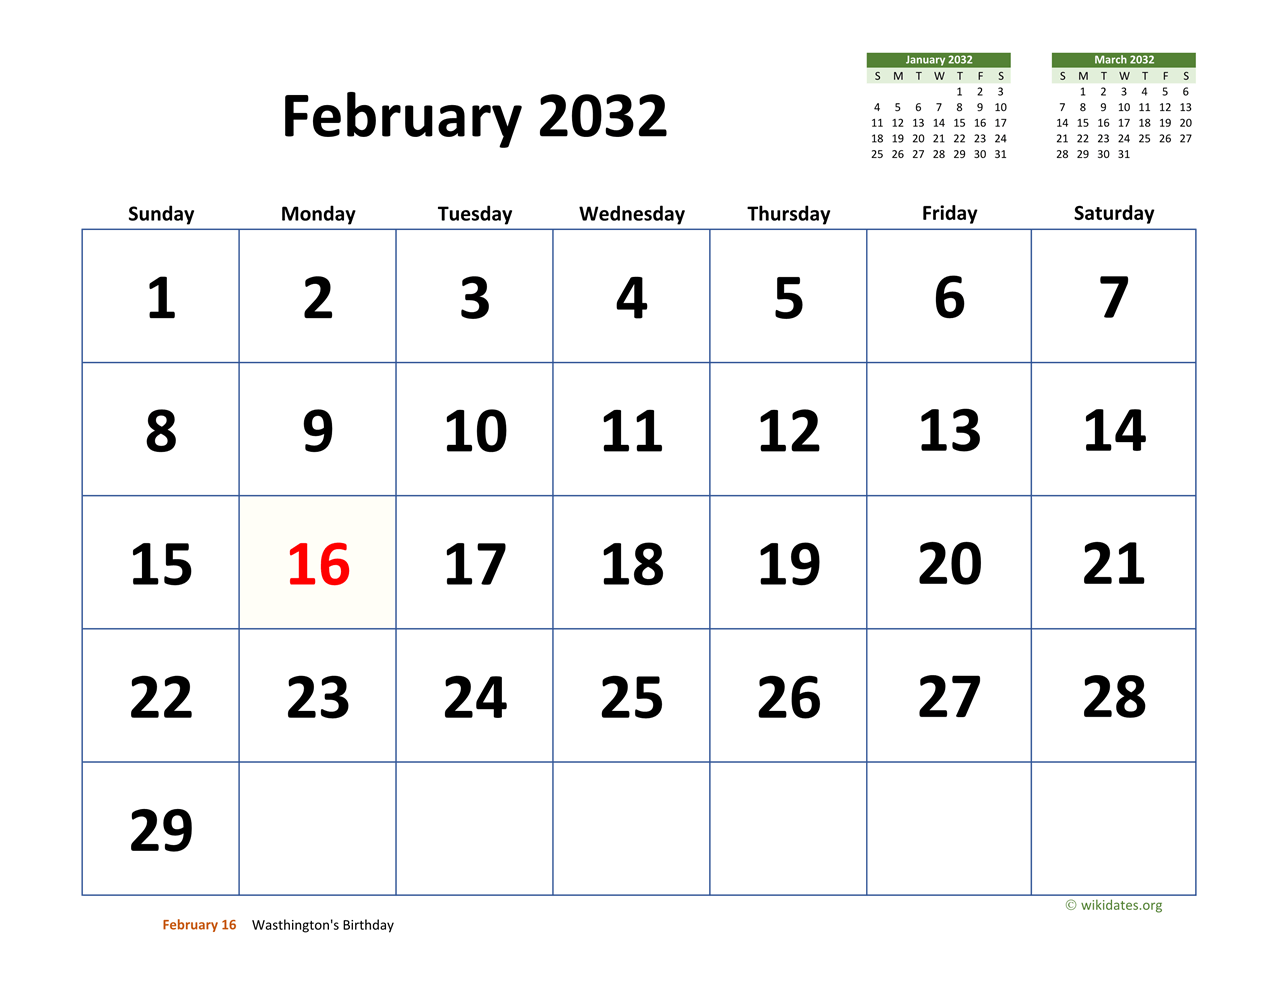 February 2032 Calendar with Extralarge Dates